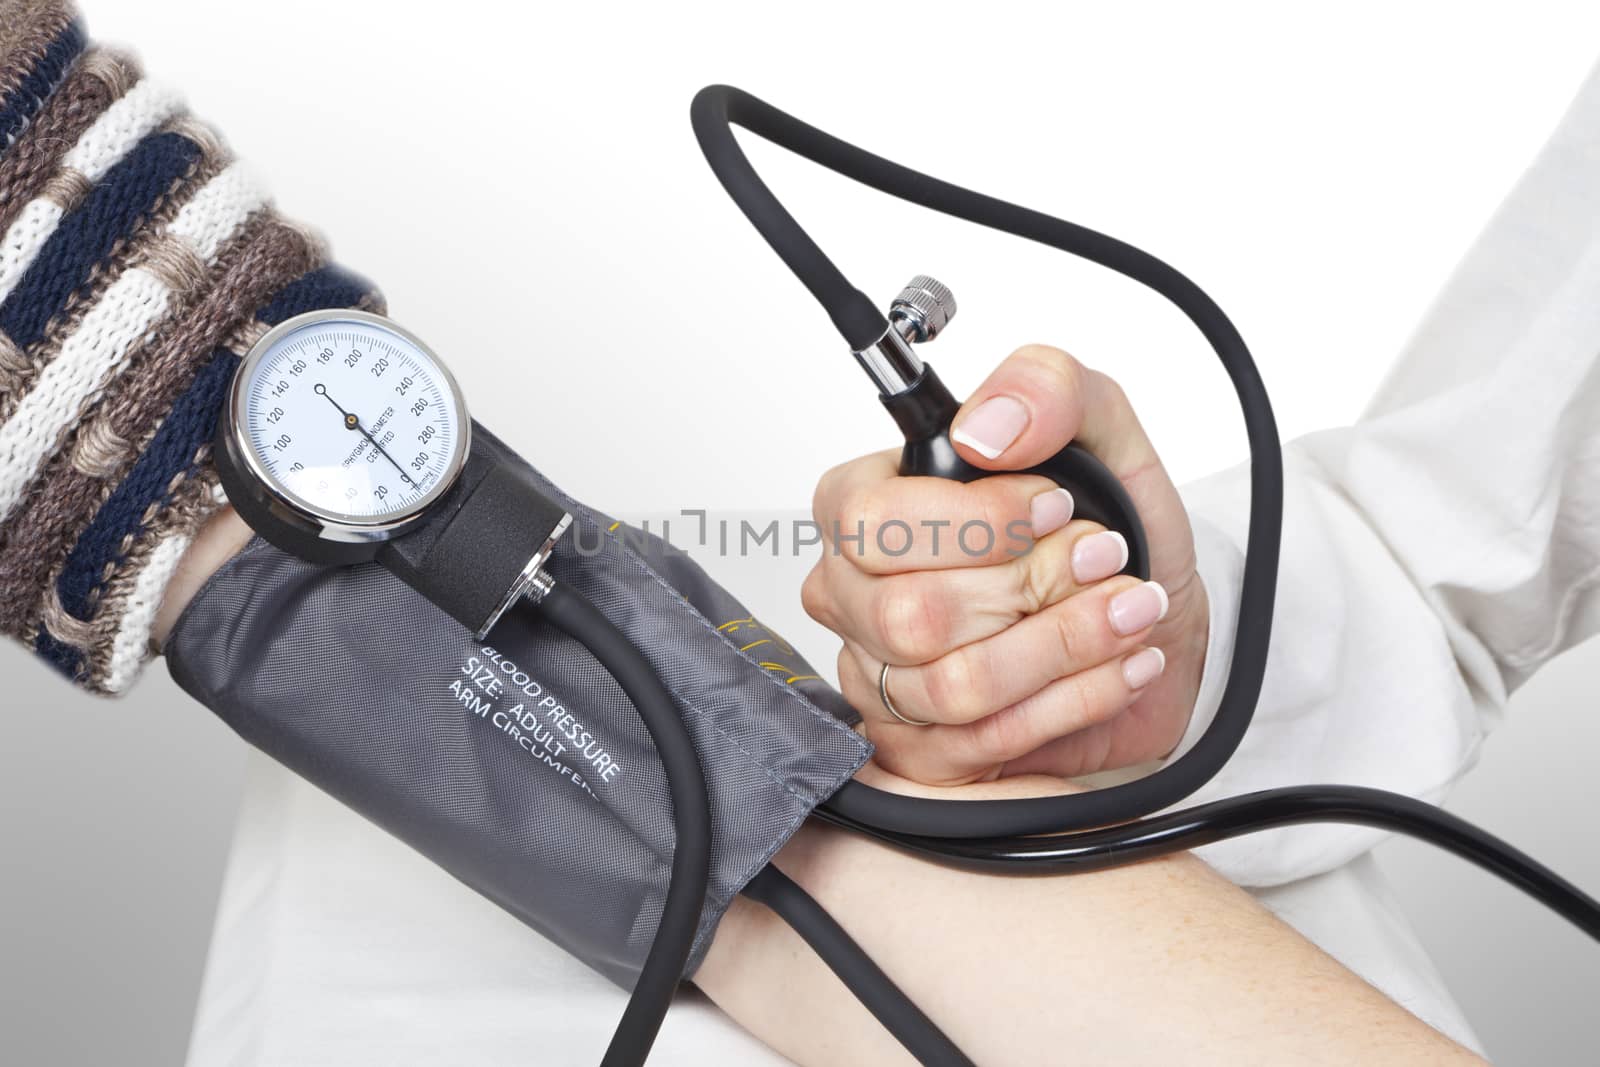 The doctor measures blood pressure in the patient